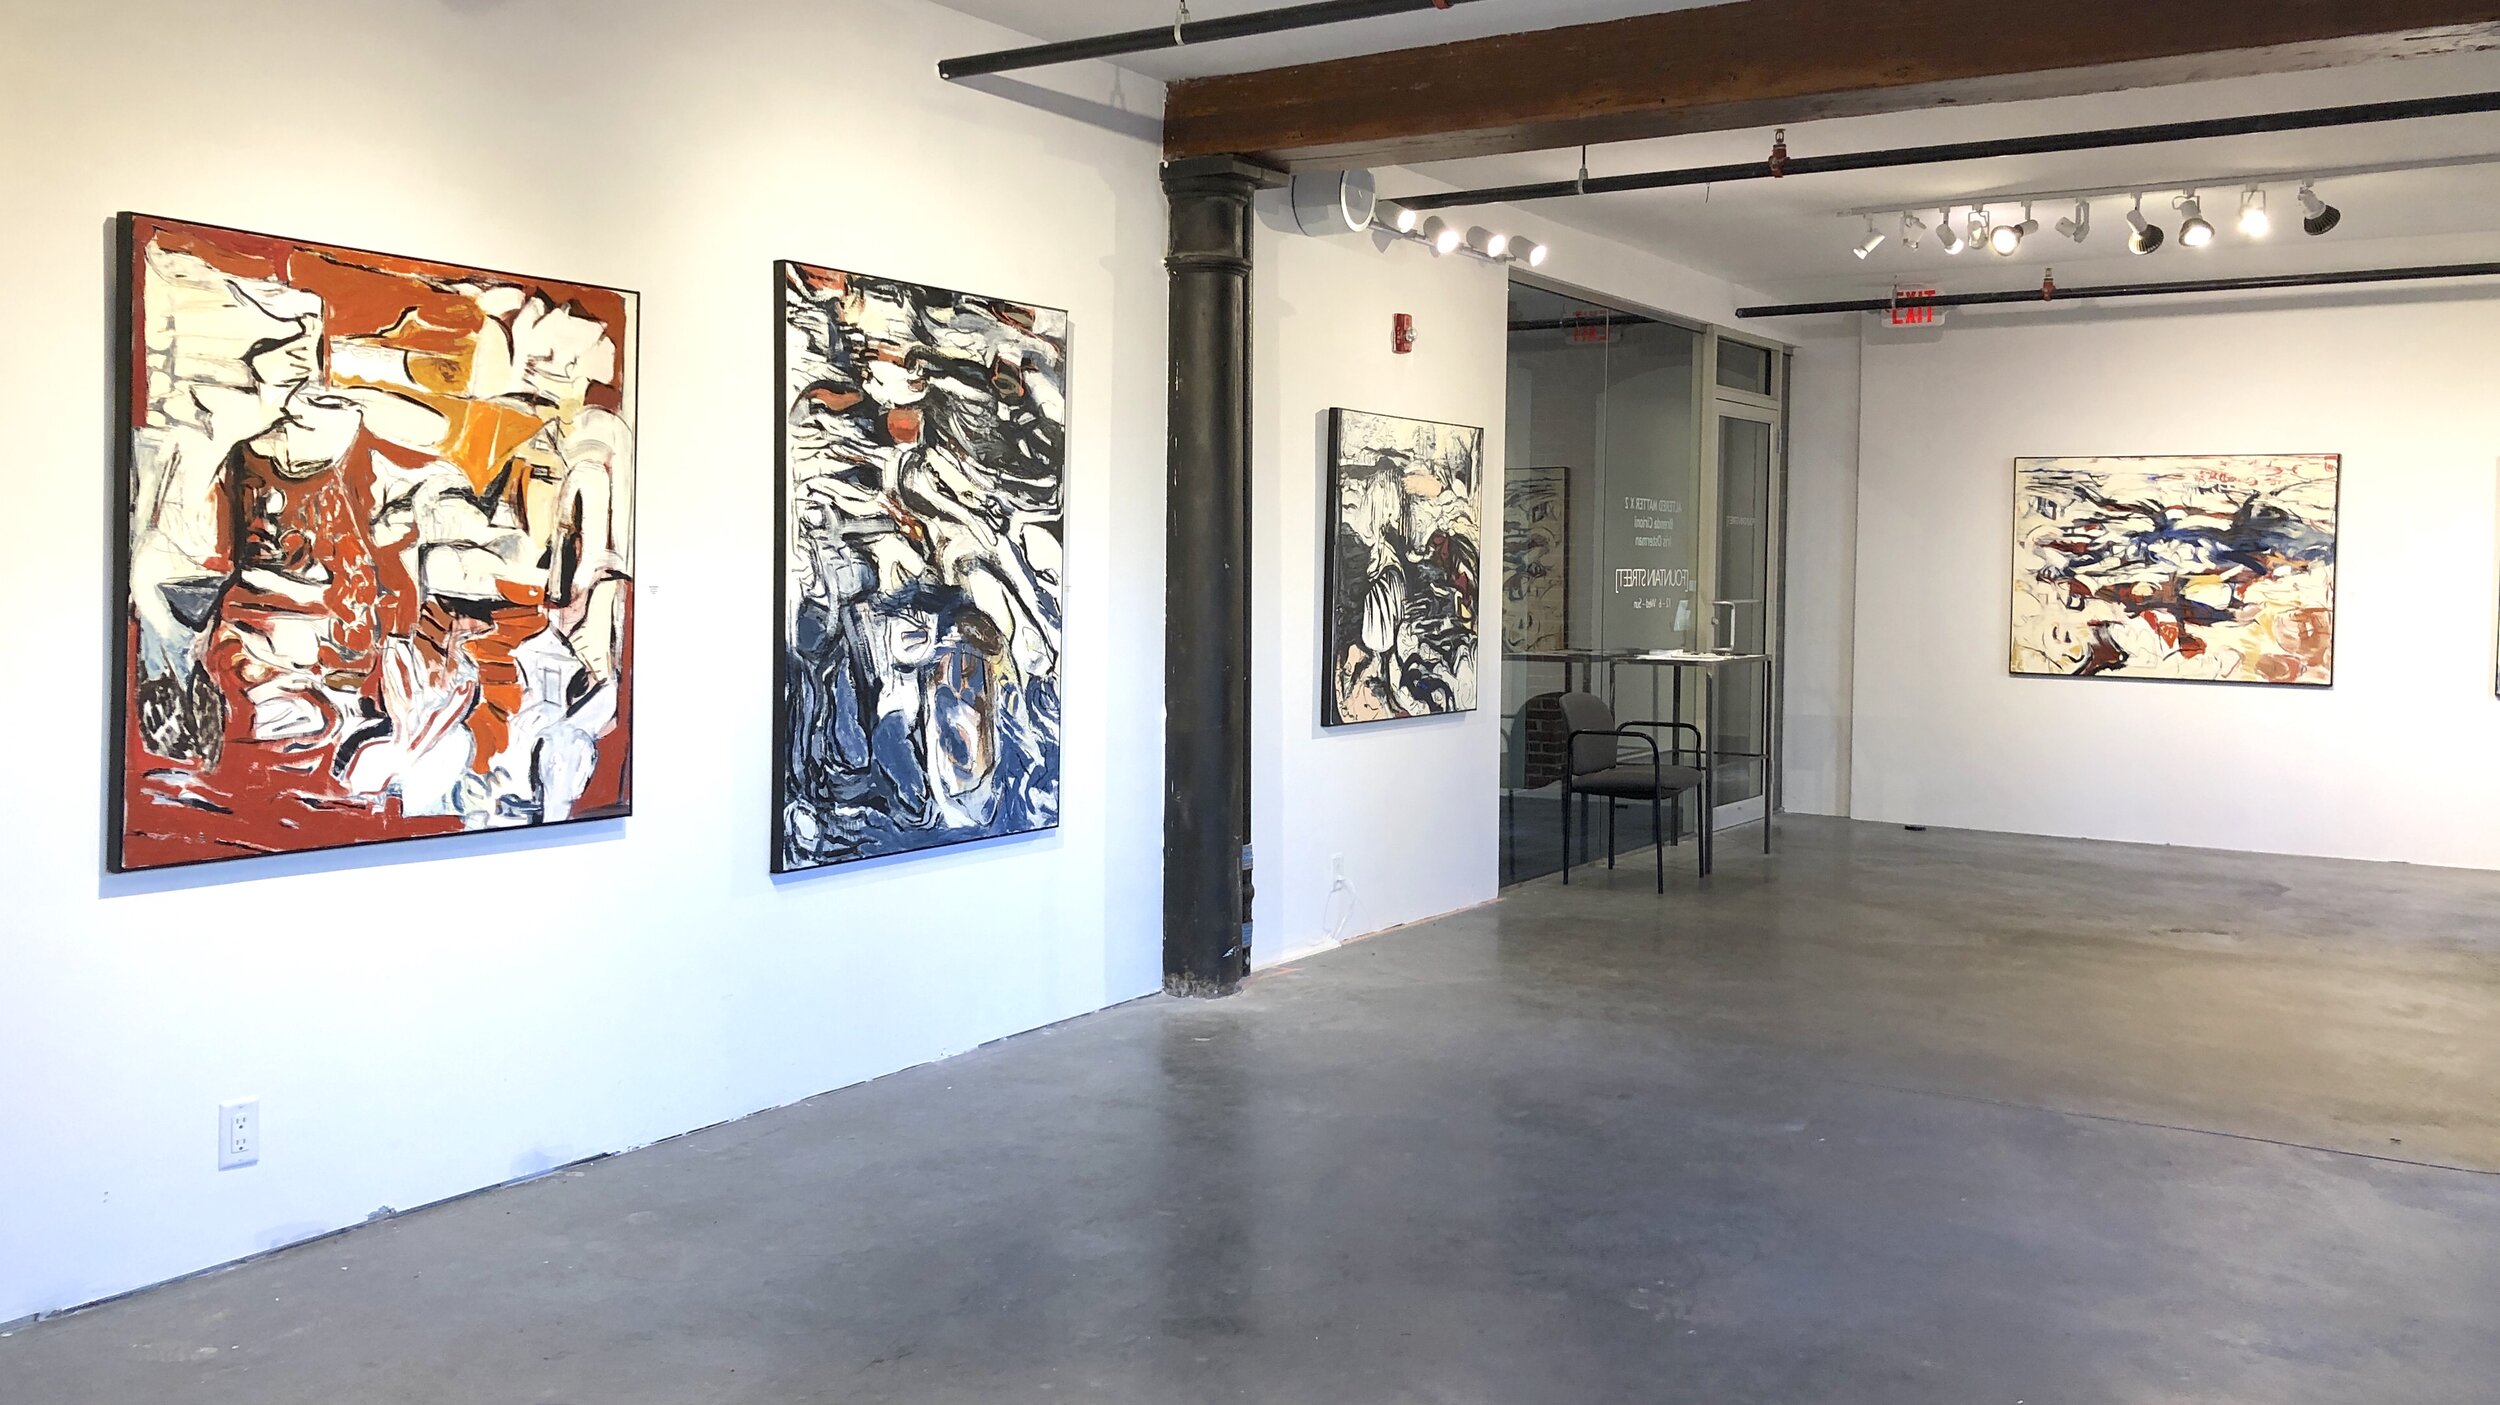  “  Altered Matter x2  ”, Brenda Cirioni and Iris Osterman, at Fountain Street Gallery, April 2019. 